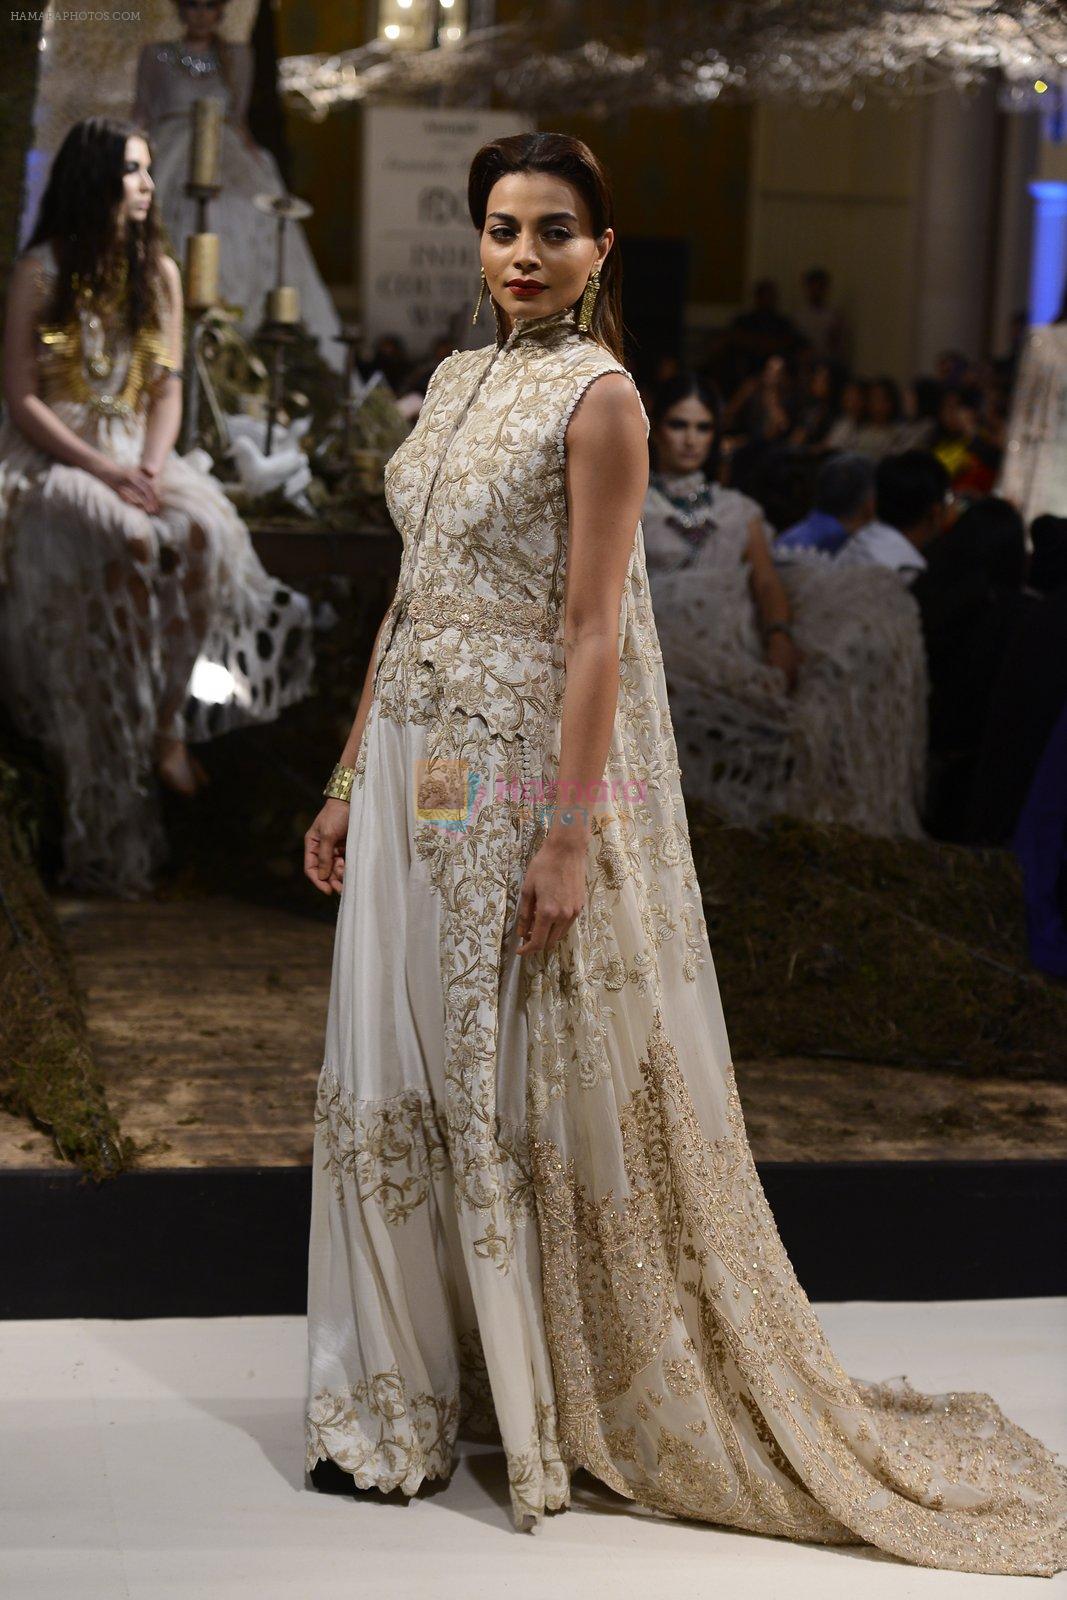 A Model during Anamika Khanna showcase When Time Stood Still at the FDCI India Couture Week 2016 on 22 July 2016